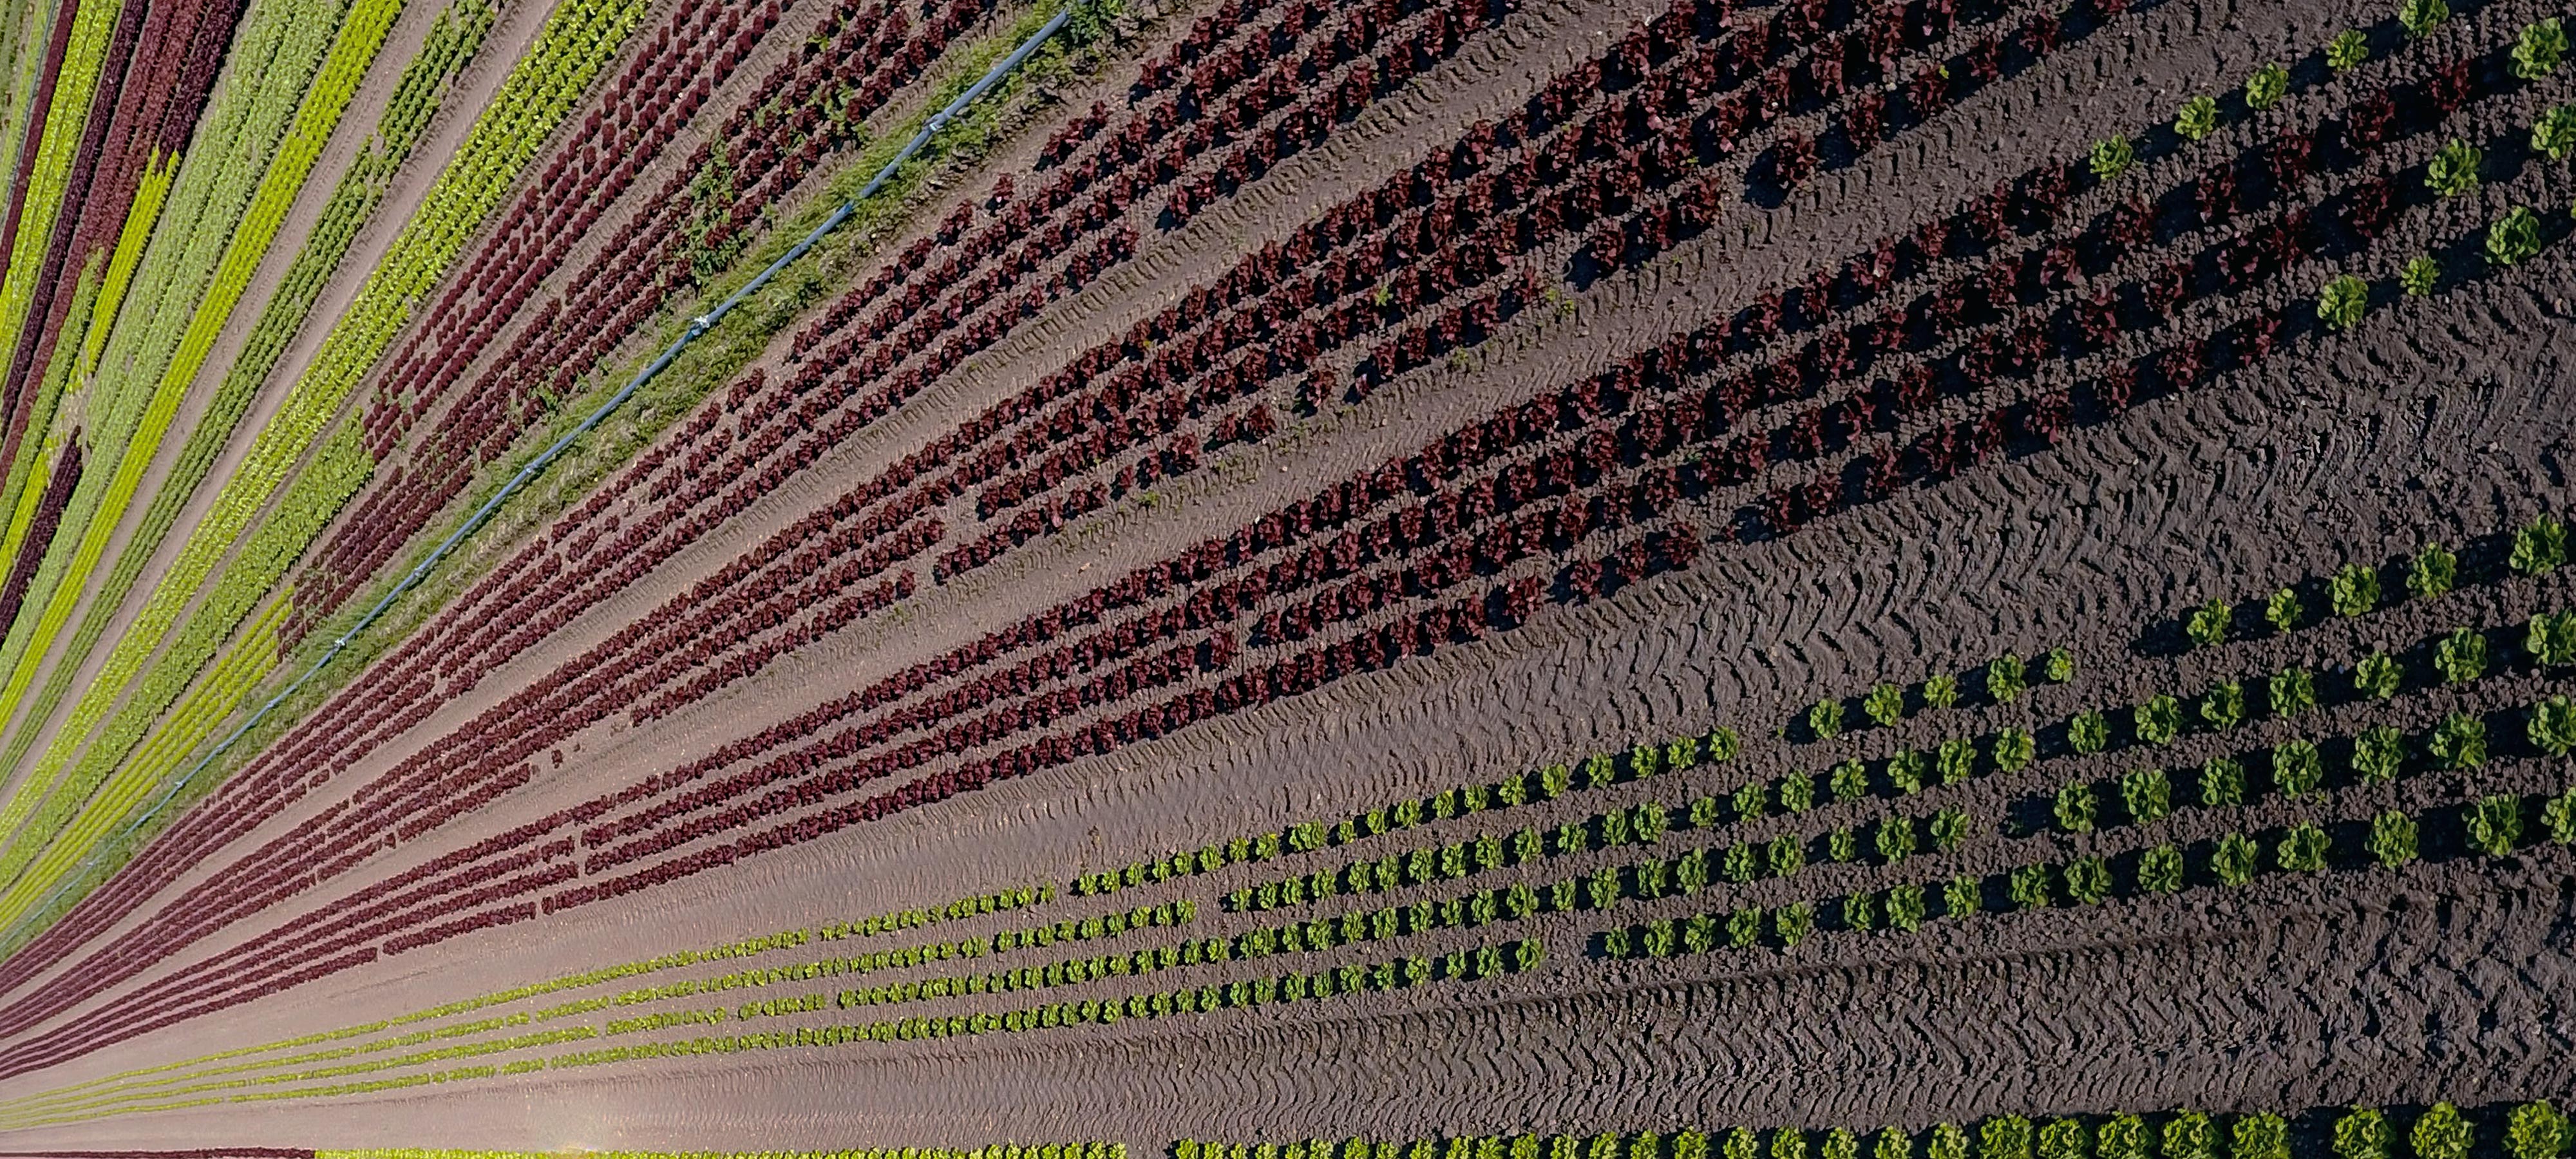 An aerial view shows rows of different varieties of lettuce planted in the ground. The lettuce varieties are different colors, and form horizontal stripes.